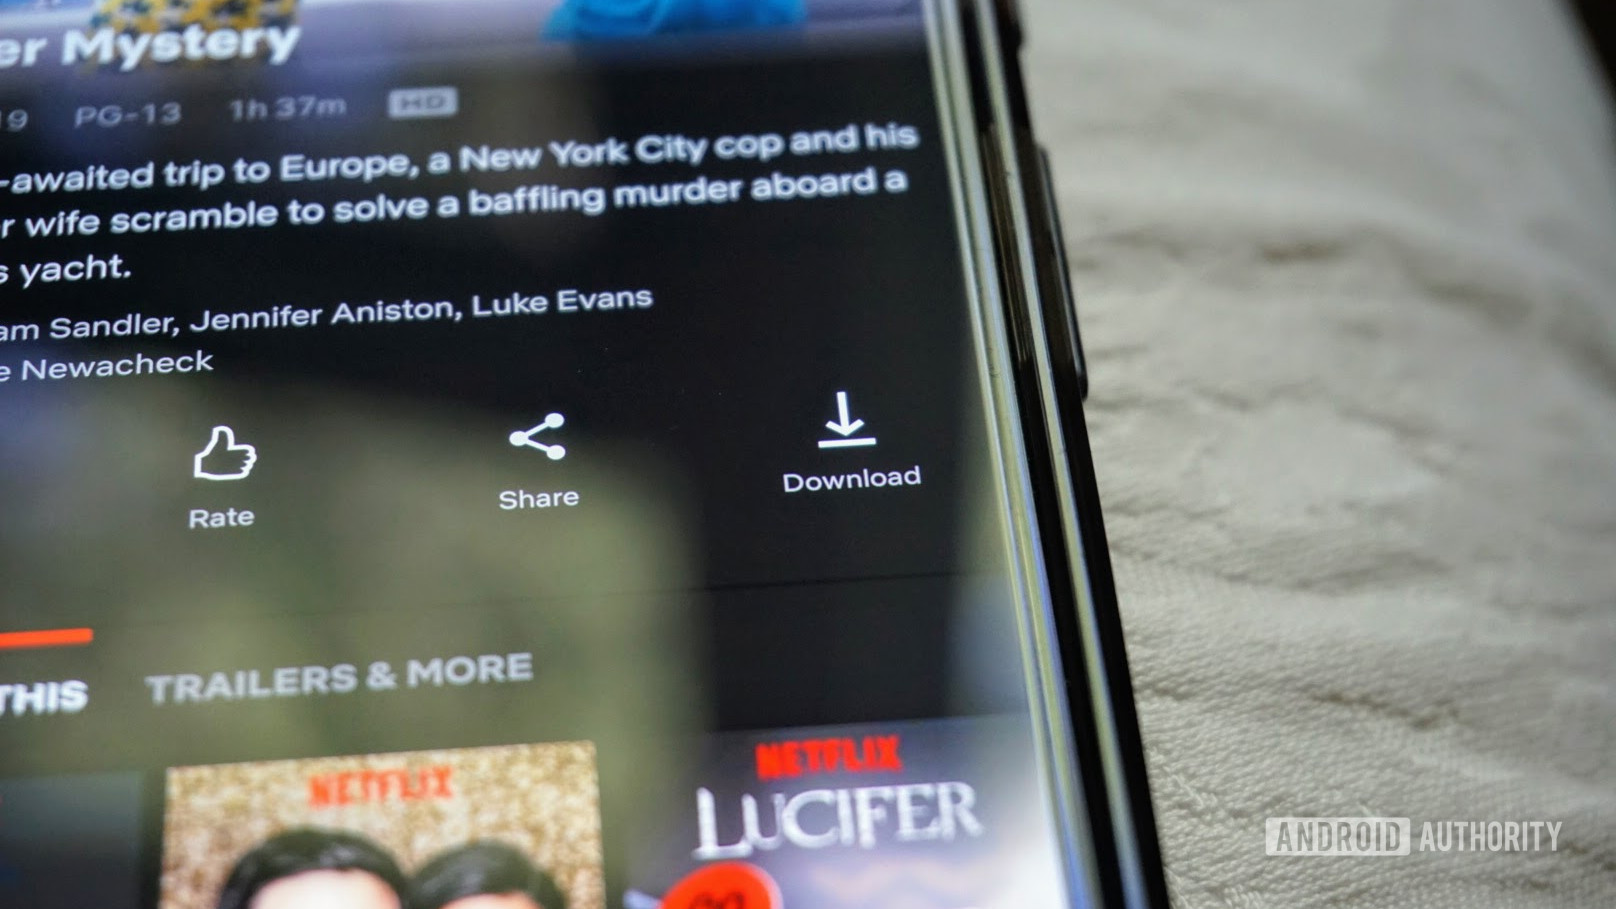 Download icon in the Netflix app.